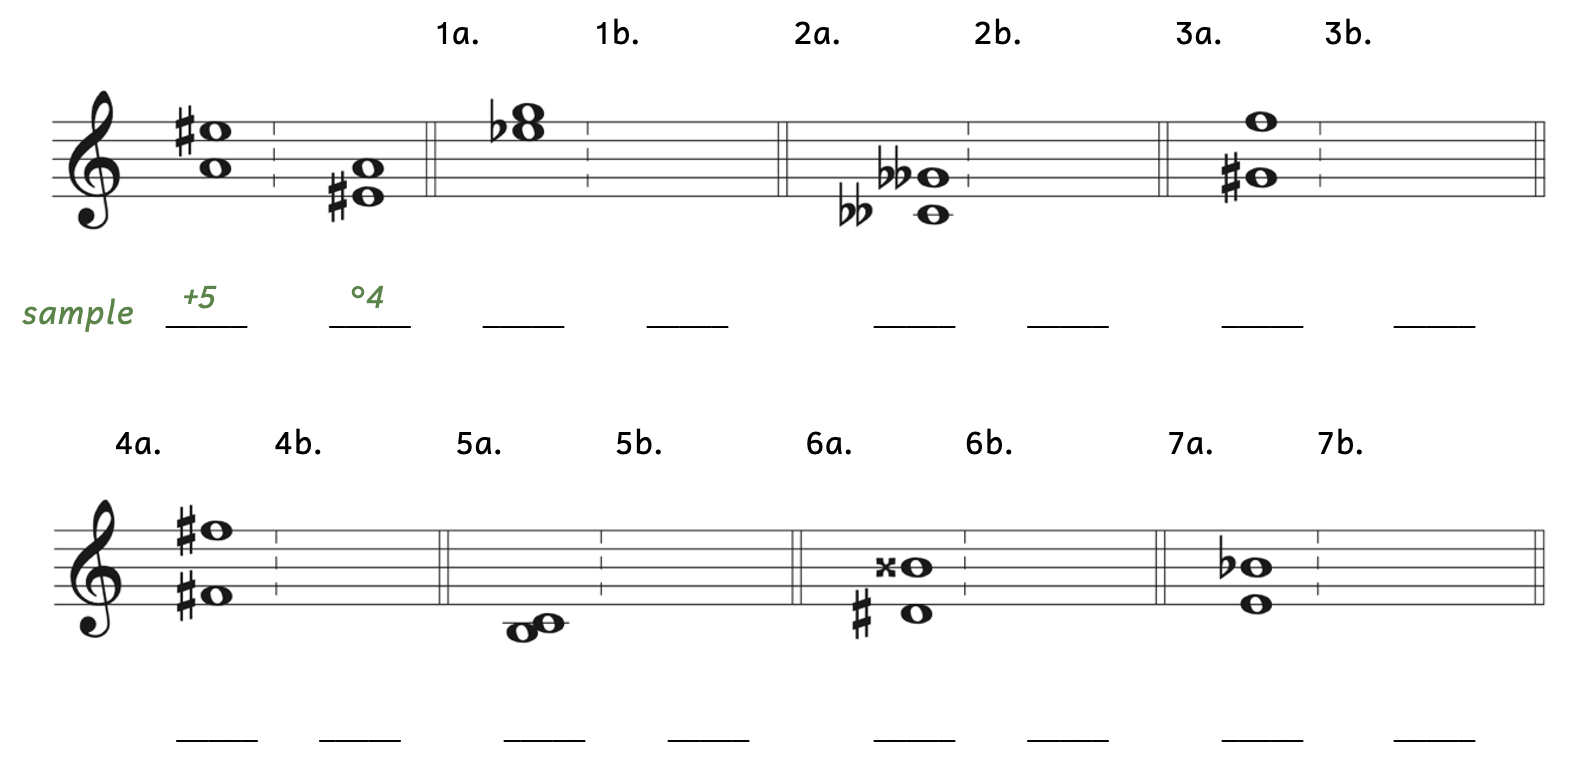 Number 1a, the notes are E-flat and G. Number 2a, the notes are C-double flat and G-double flat. Number 3a, the notes are G-sharp and F. Number 4a, the notes are F-sharp up to F-sharp. Number 5a, the notes are B and C. Number 6a, the notes are D-sharp and B-double flat. Number 7a, the notes are E and B-flat.